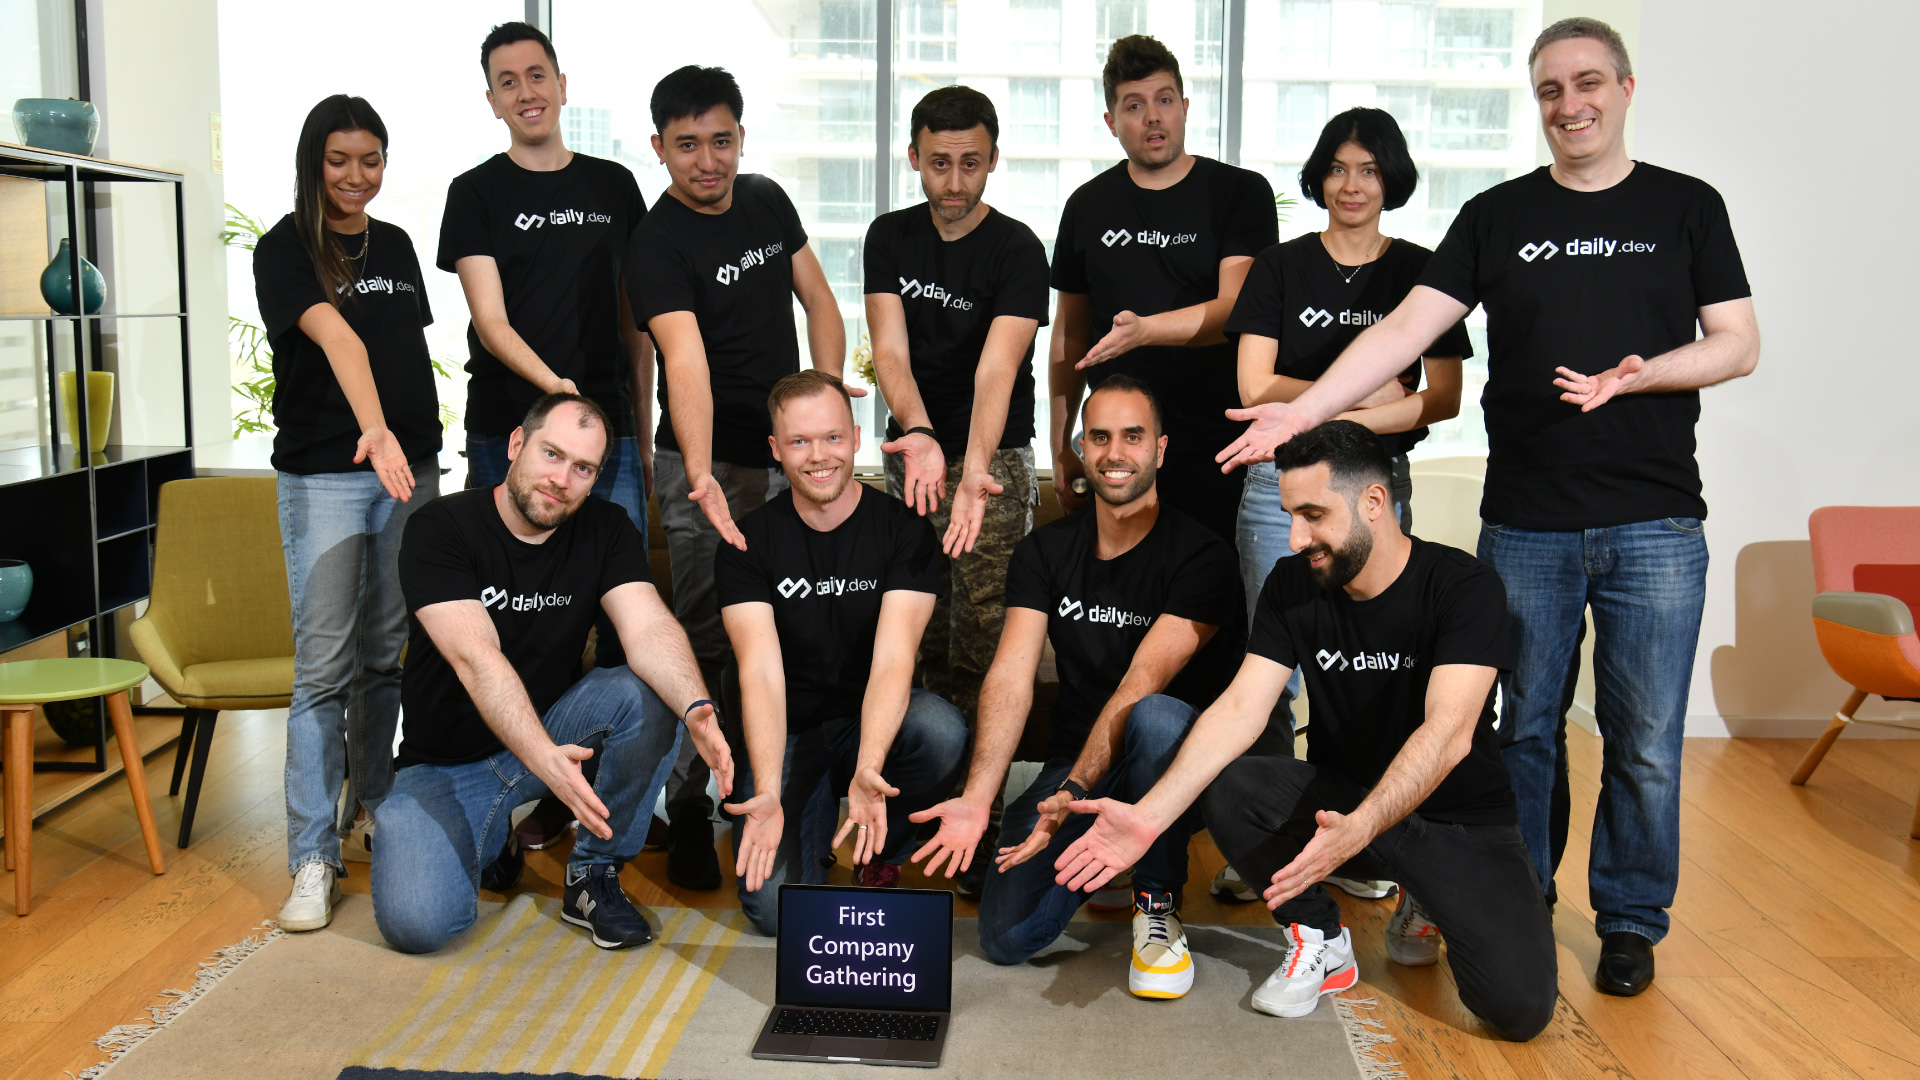 the daily.dev team in branded tshirts pointing at a laptop with the text 'first company gathering' on the screen